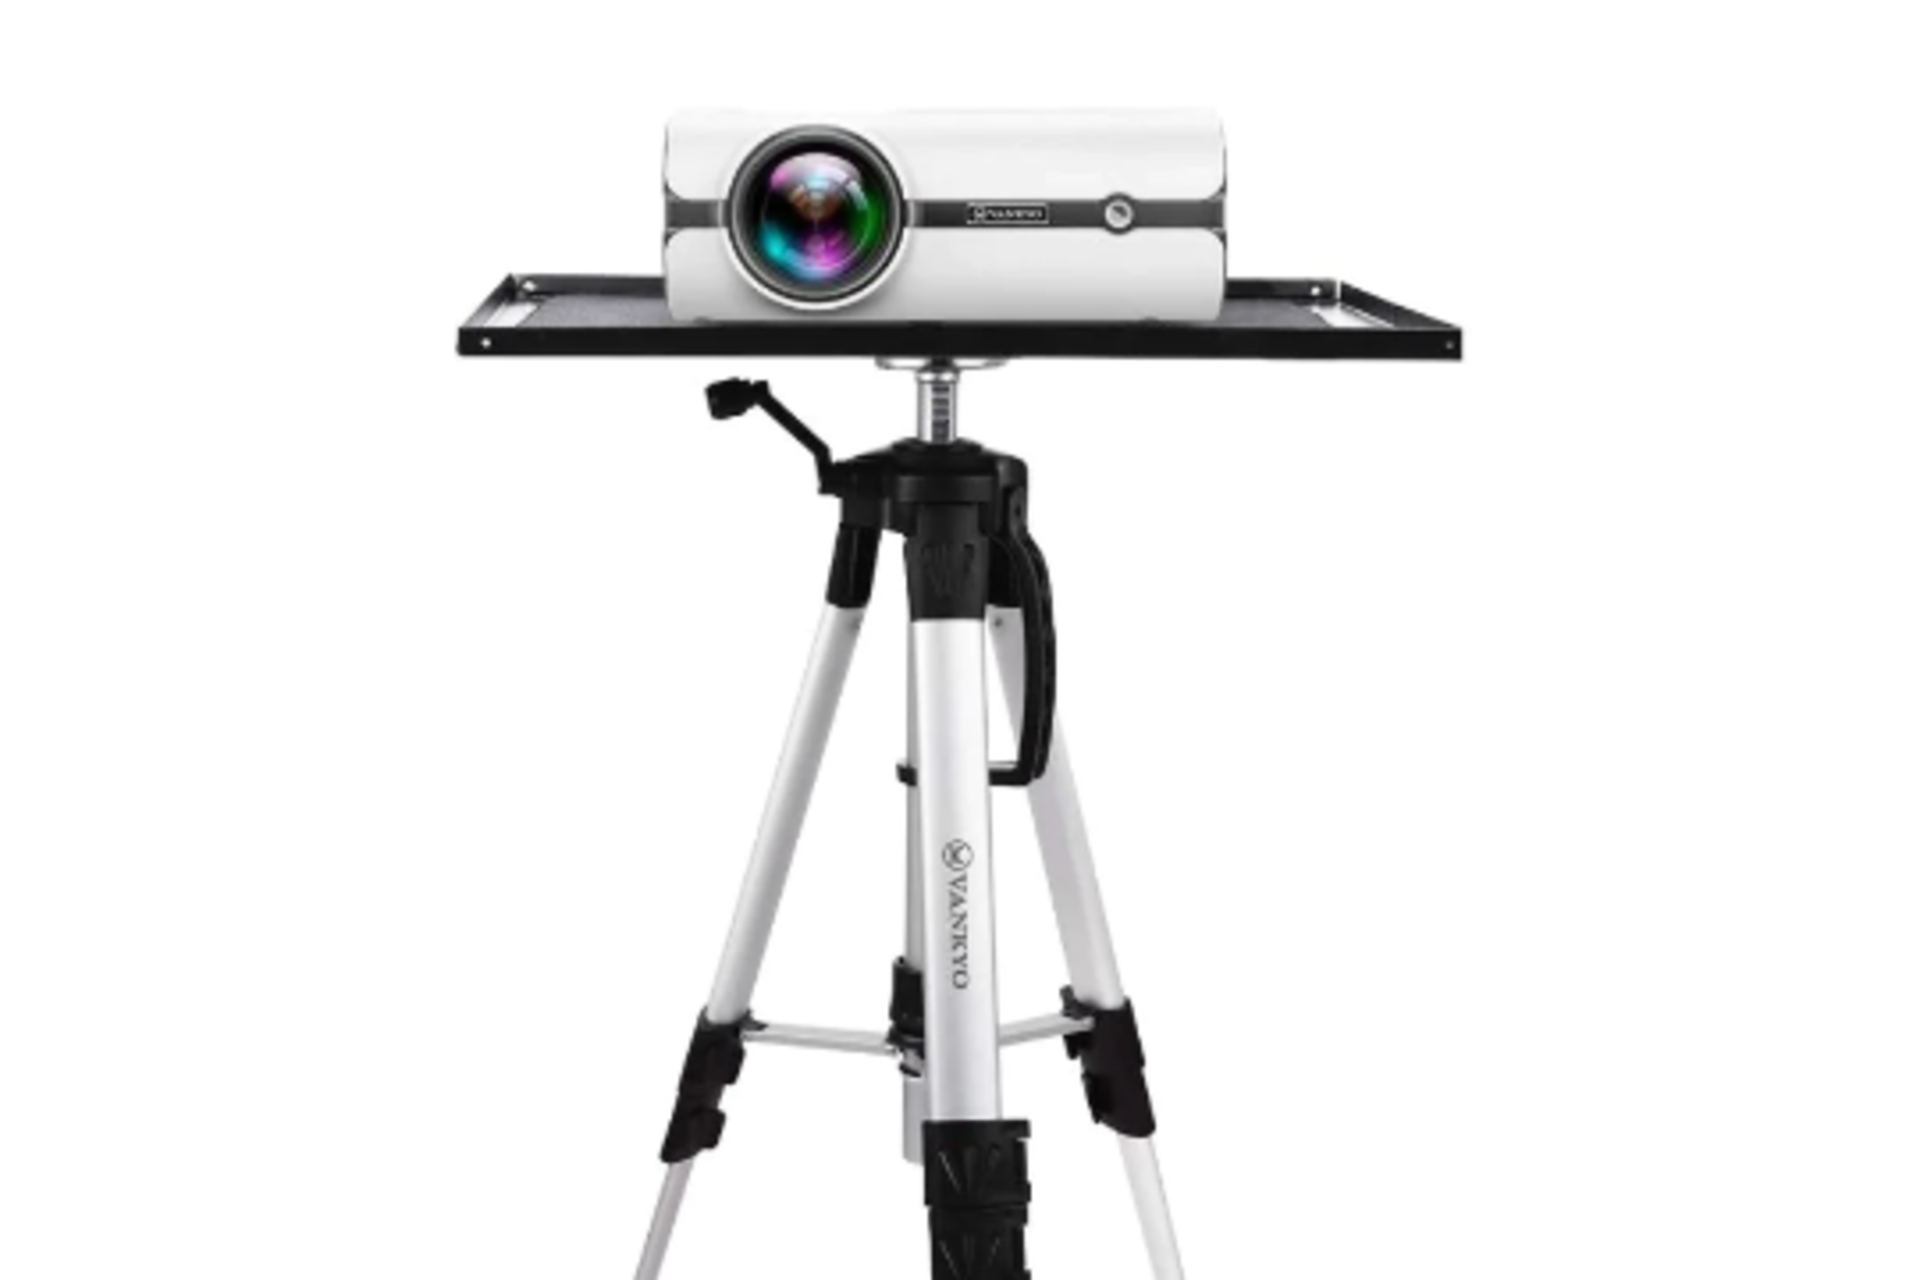 New Boxed VANKYO PT30 Projector Stand. VANKYO Universal Laptop Projector Stand with 15'' x 11''